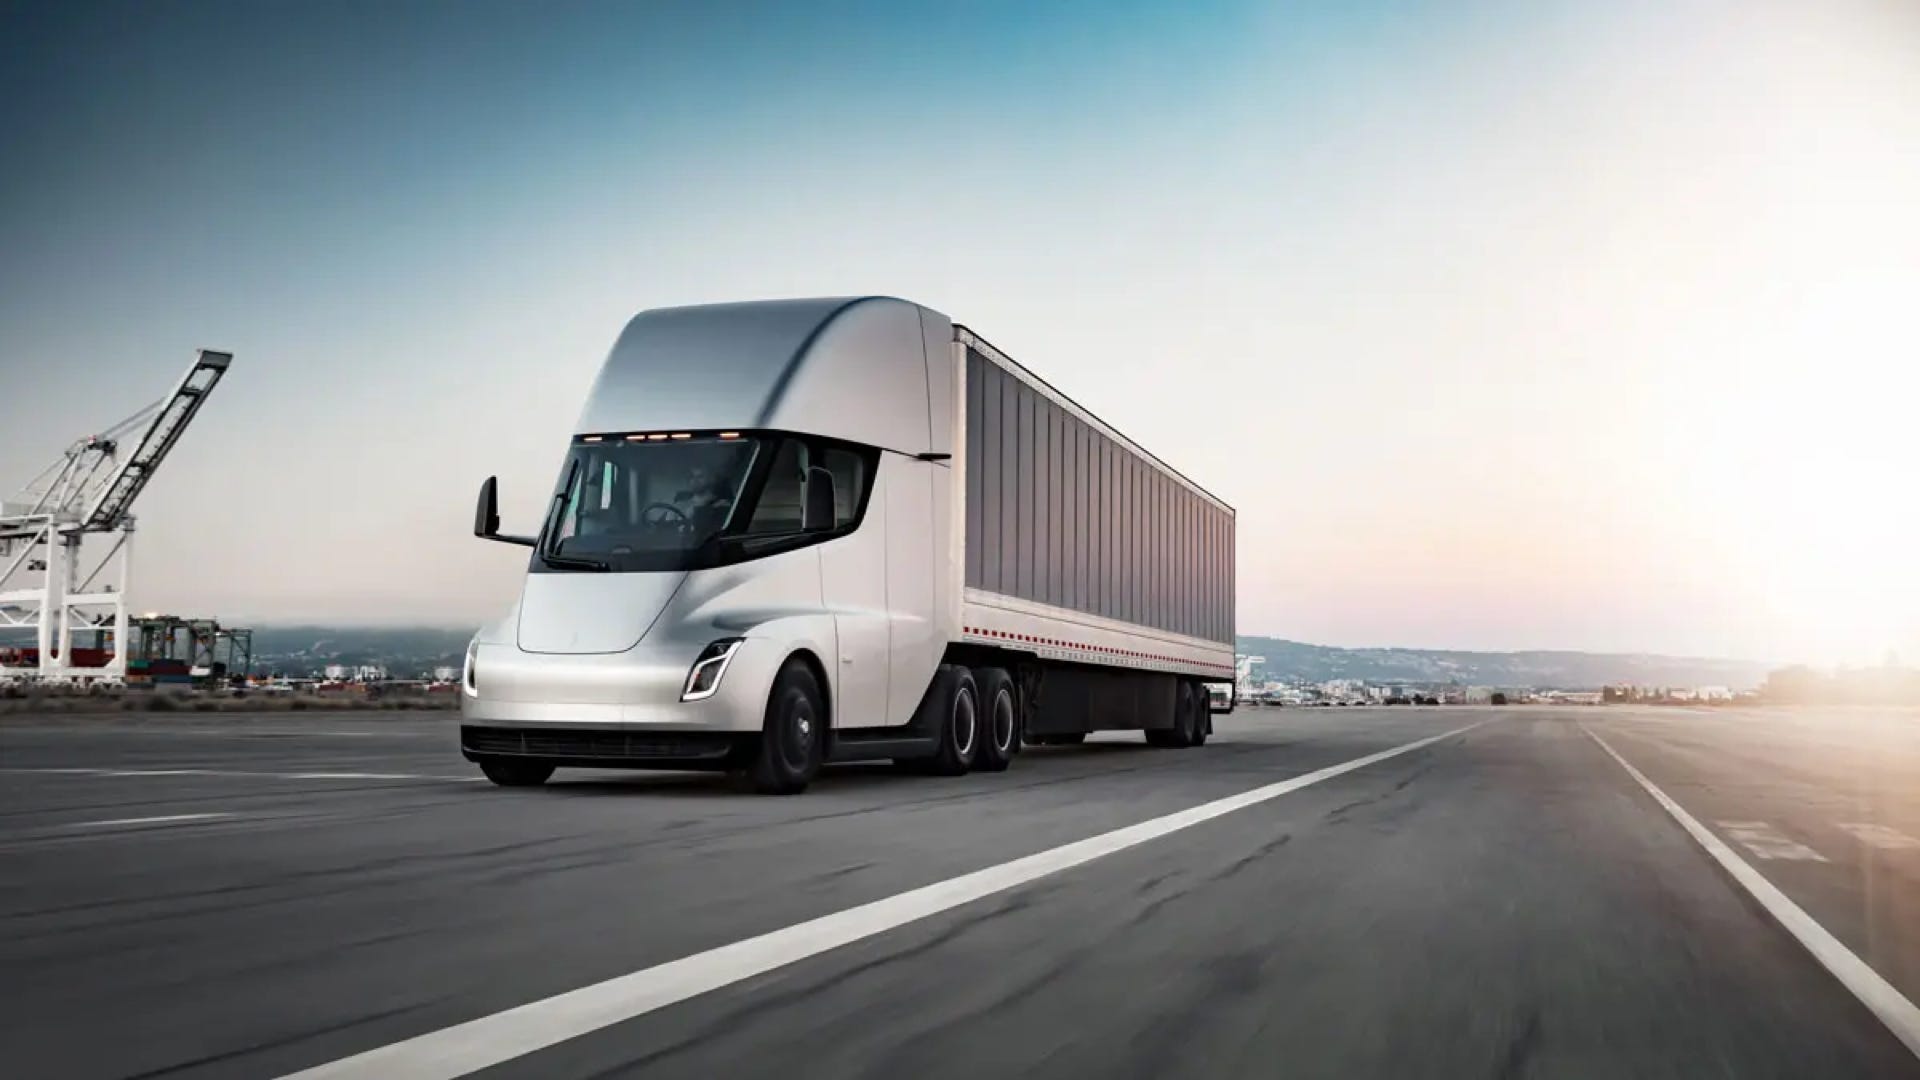 Watch Telsa’s Semi Truck Glide to Highway Speeds With Ease